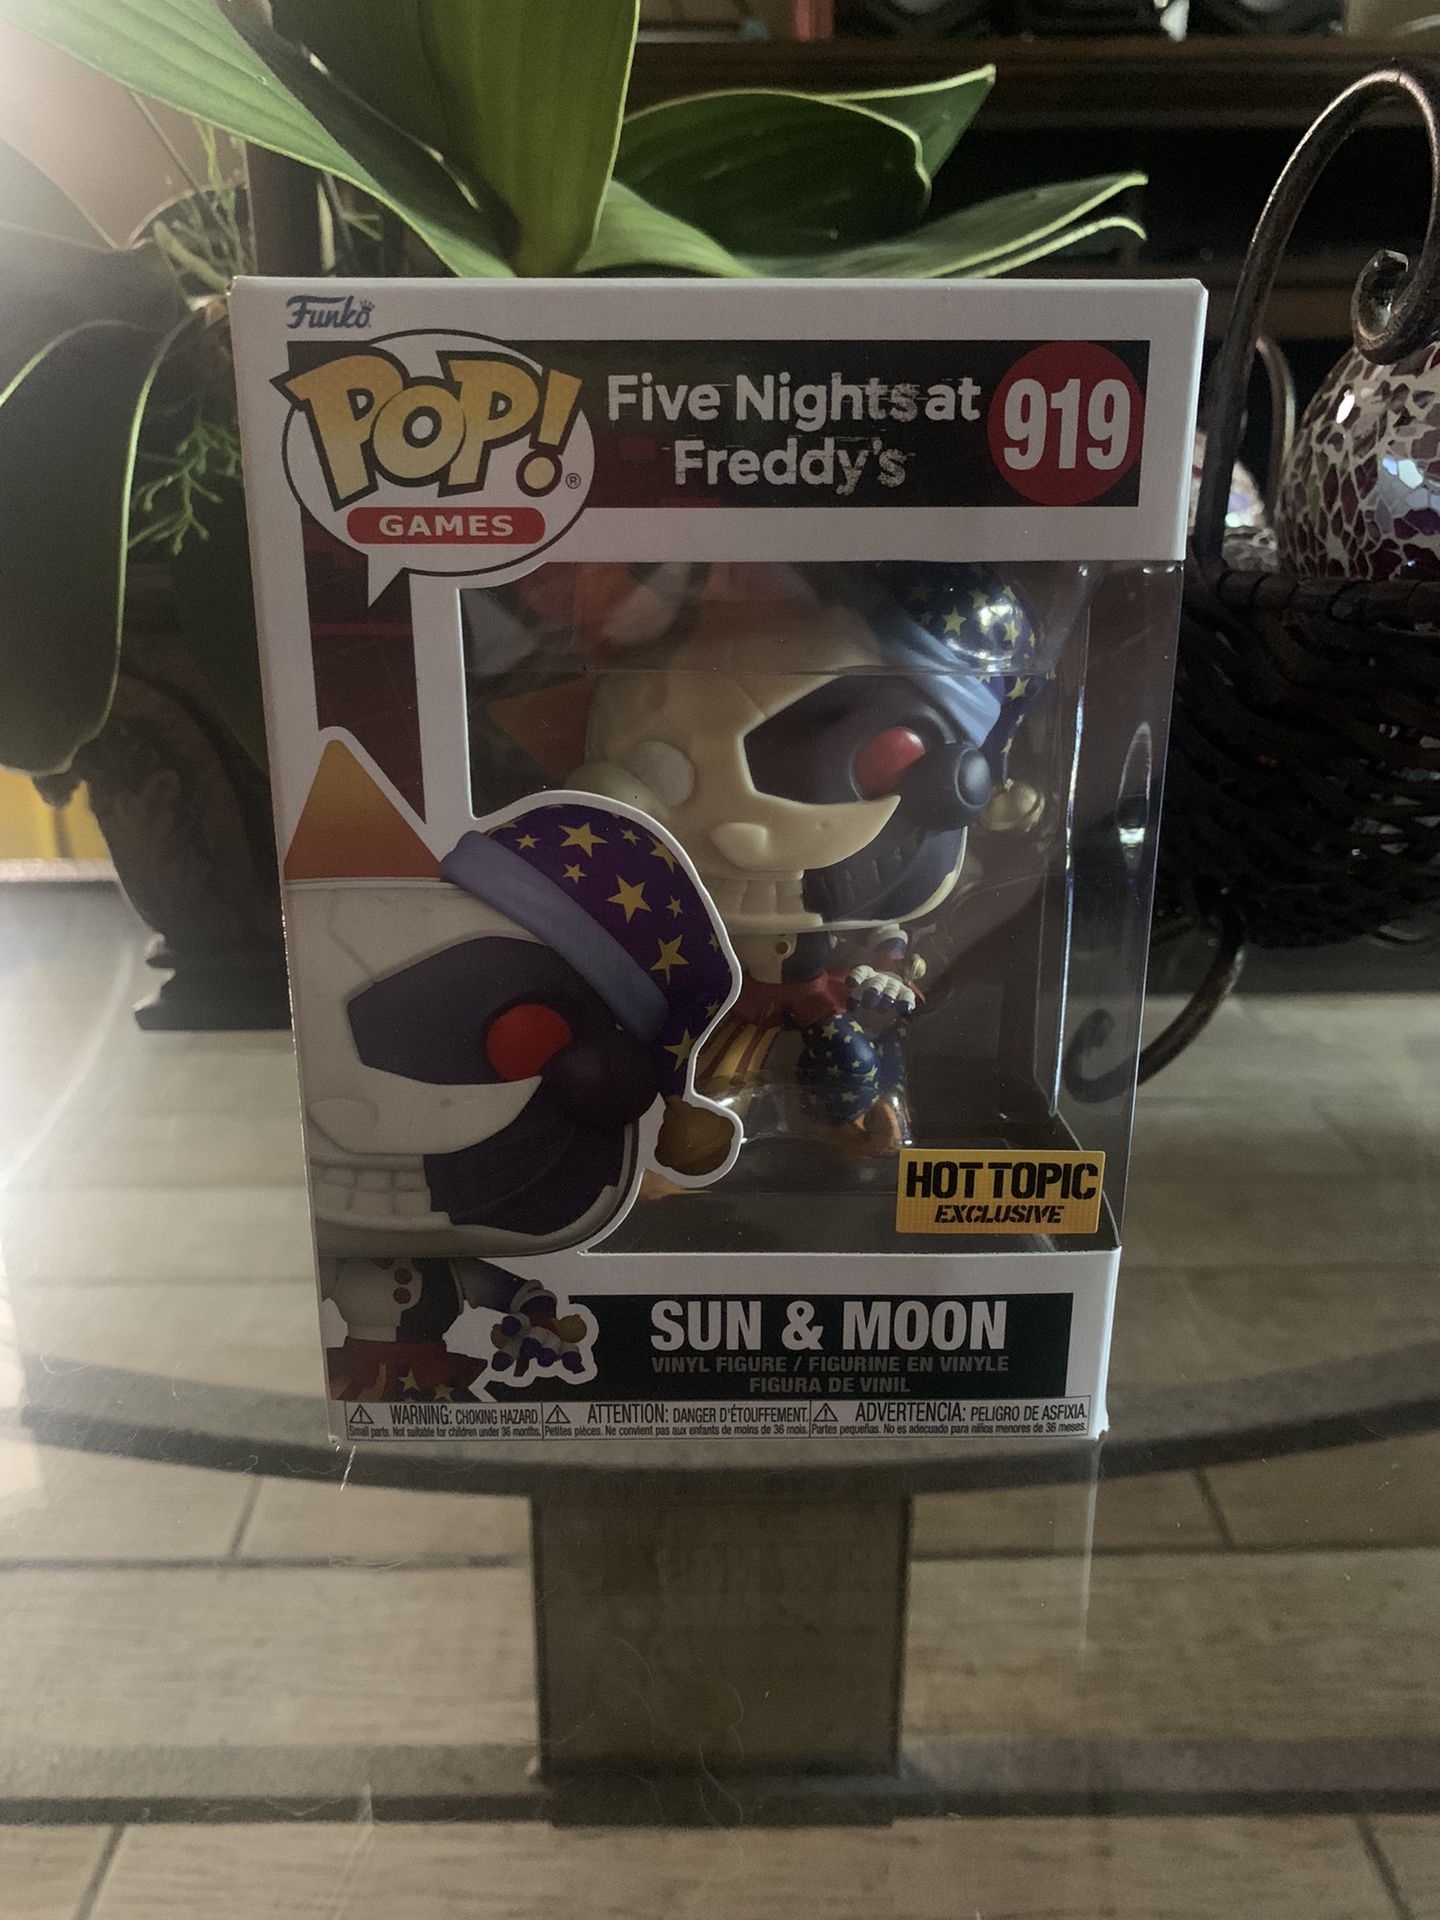 Five Nights At Freddy's - Sun & Moon - POP! Games action figure 919